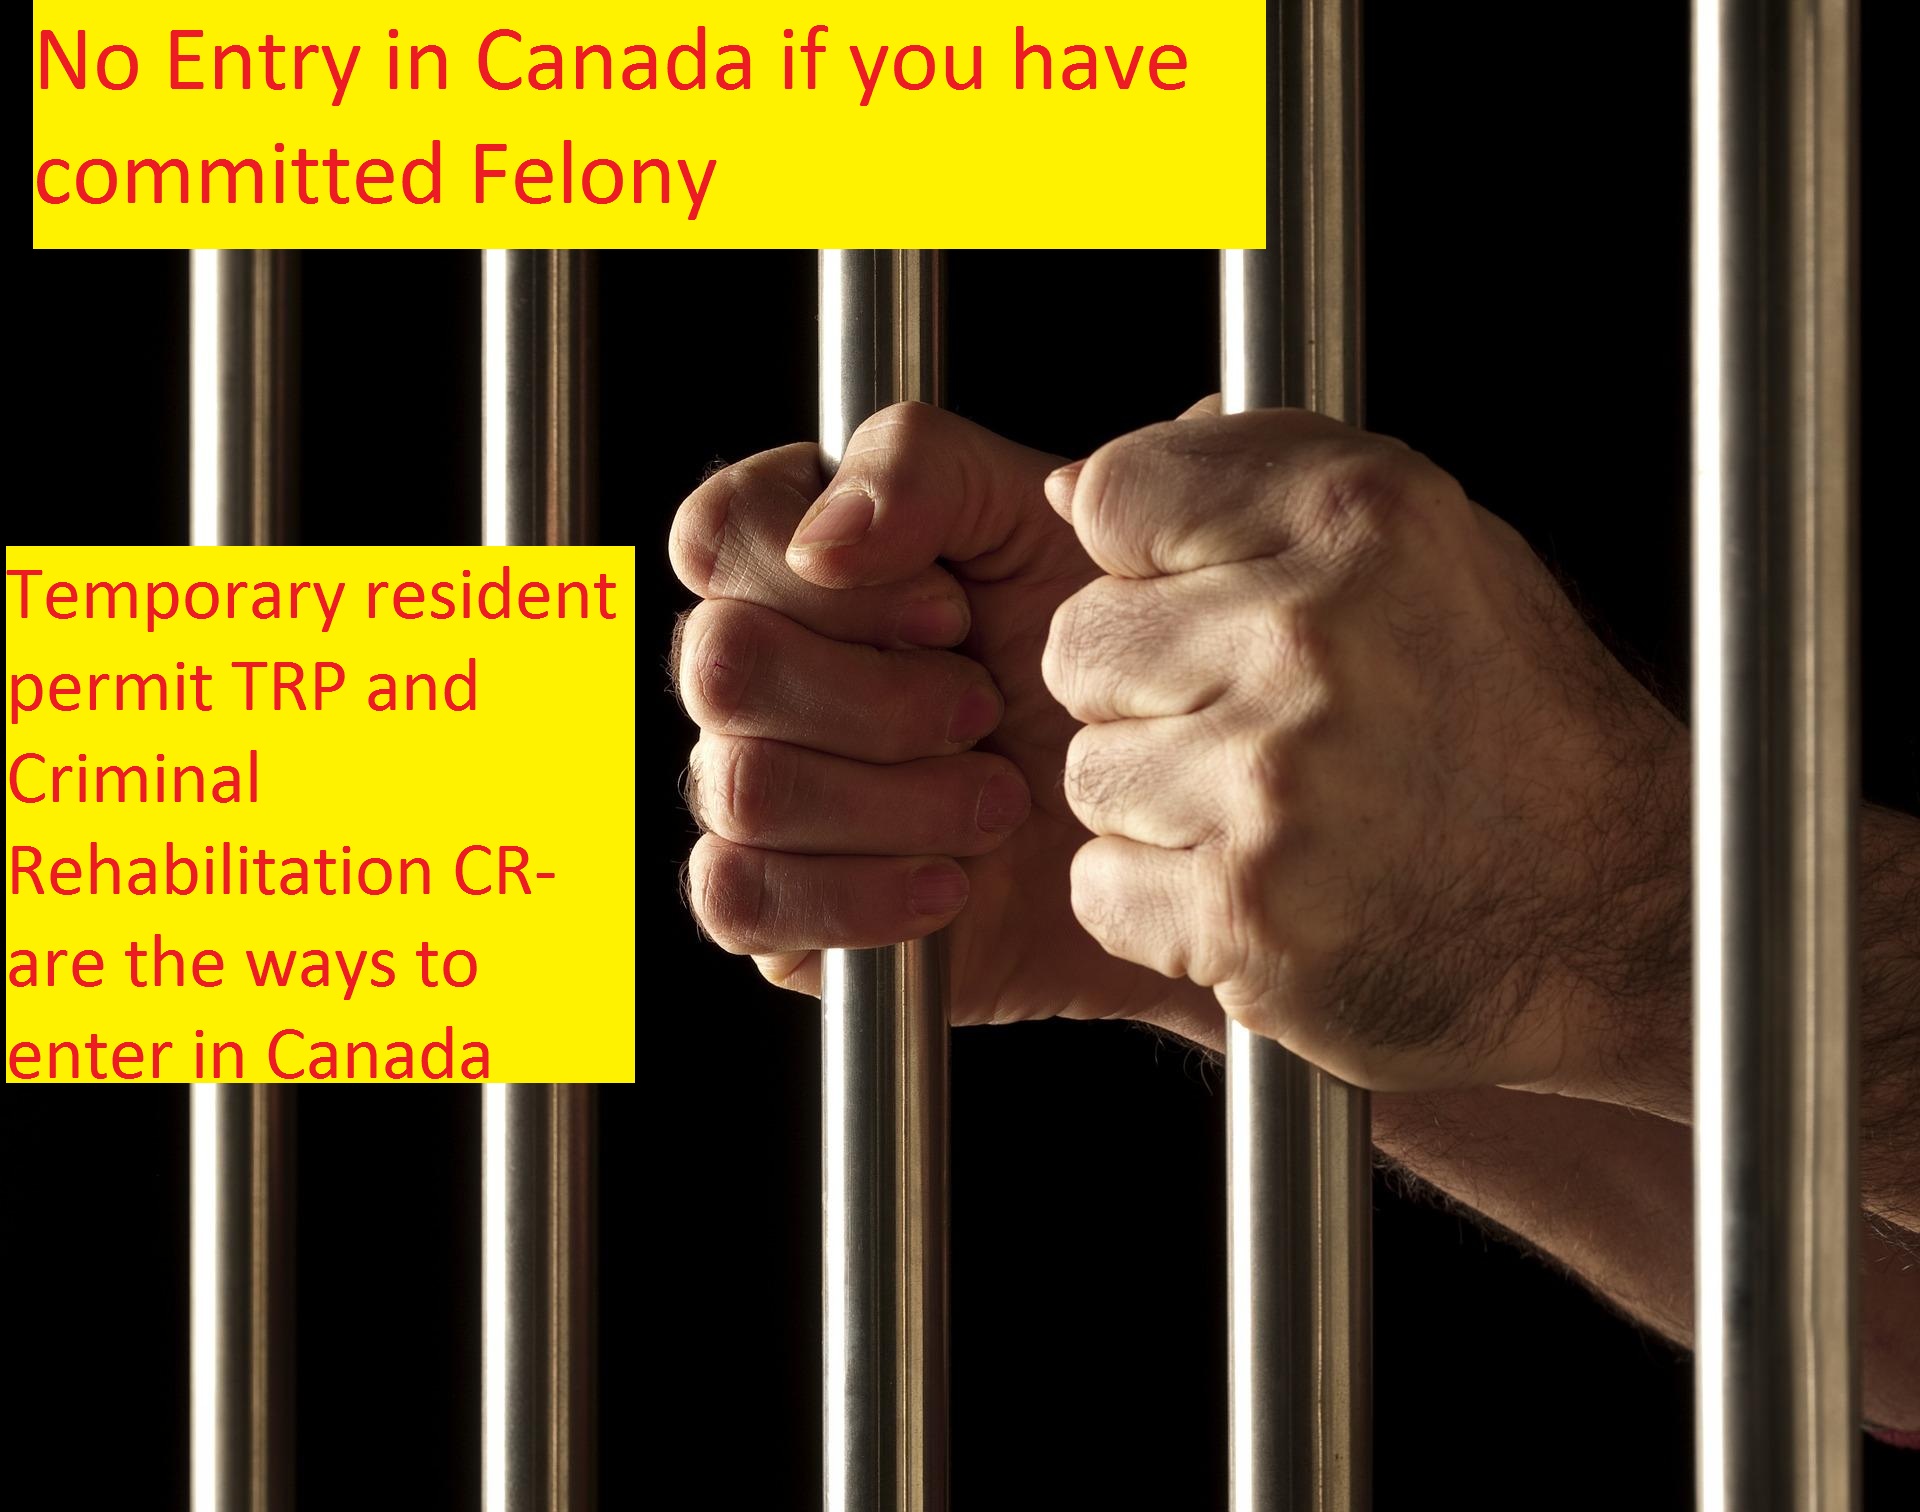 No Entry in Canada if you have committed Felony